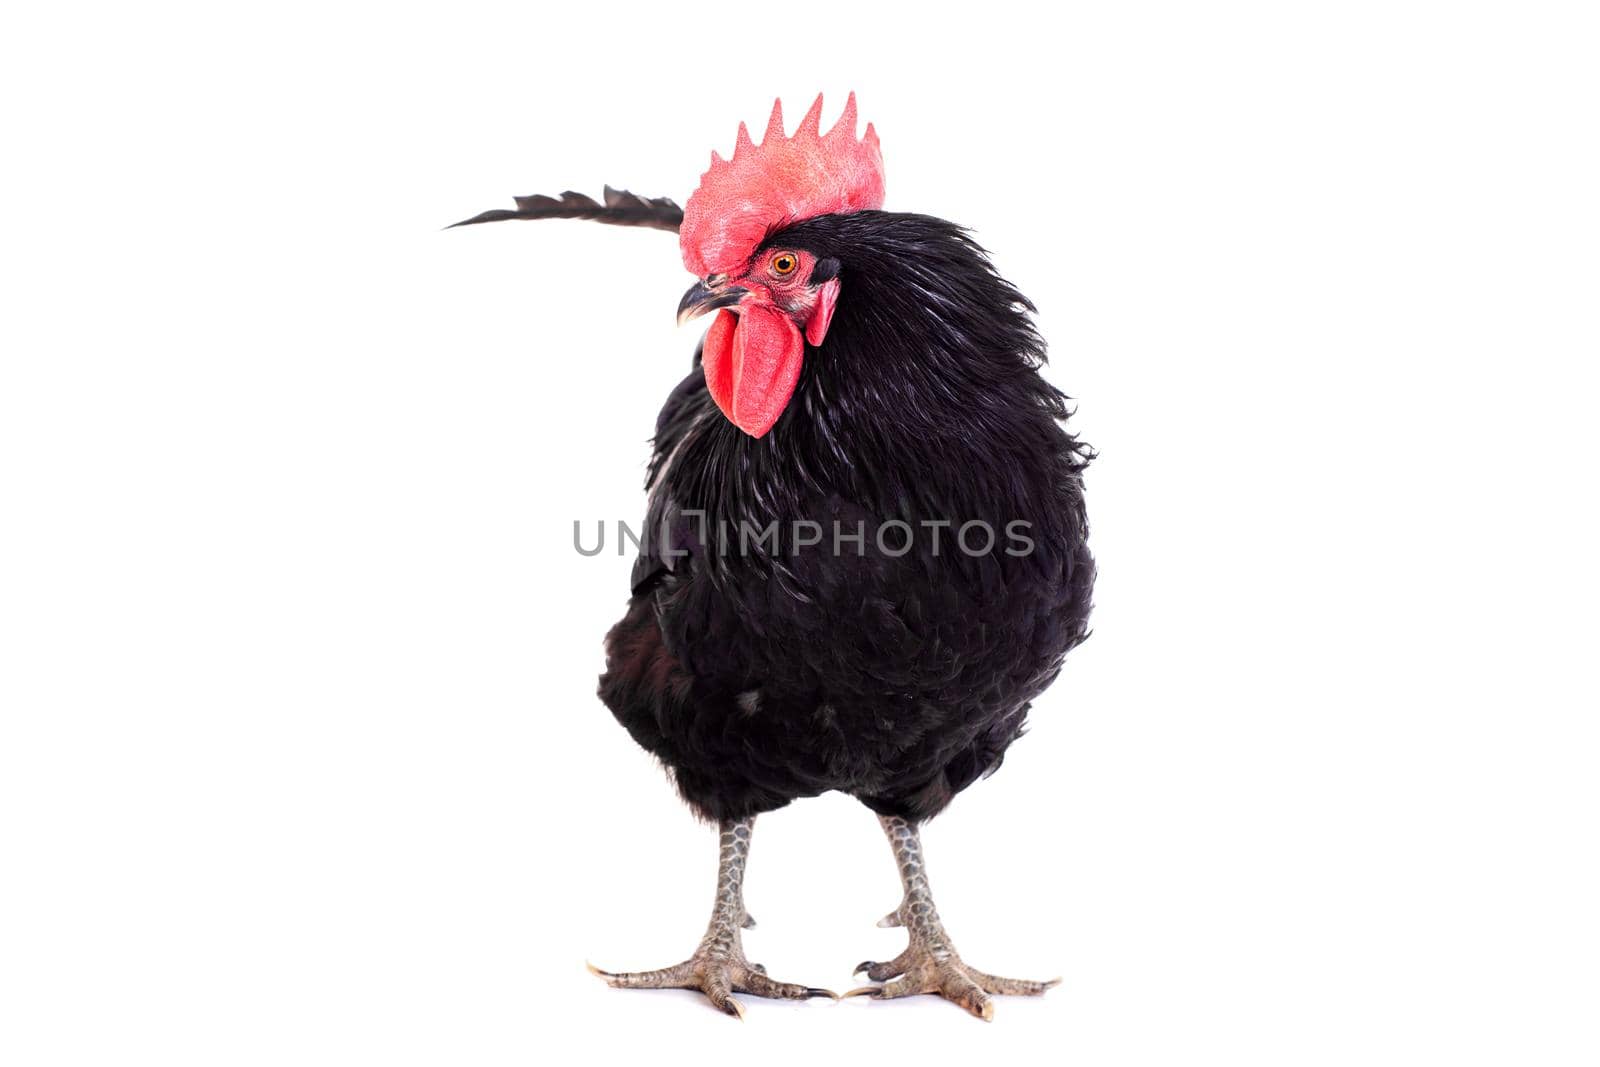 Black rooster isolated on a white background